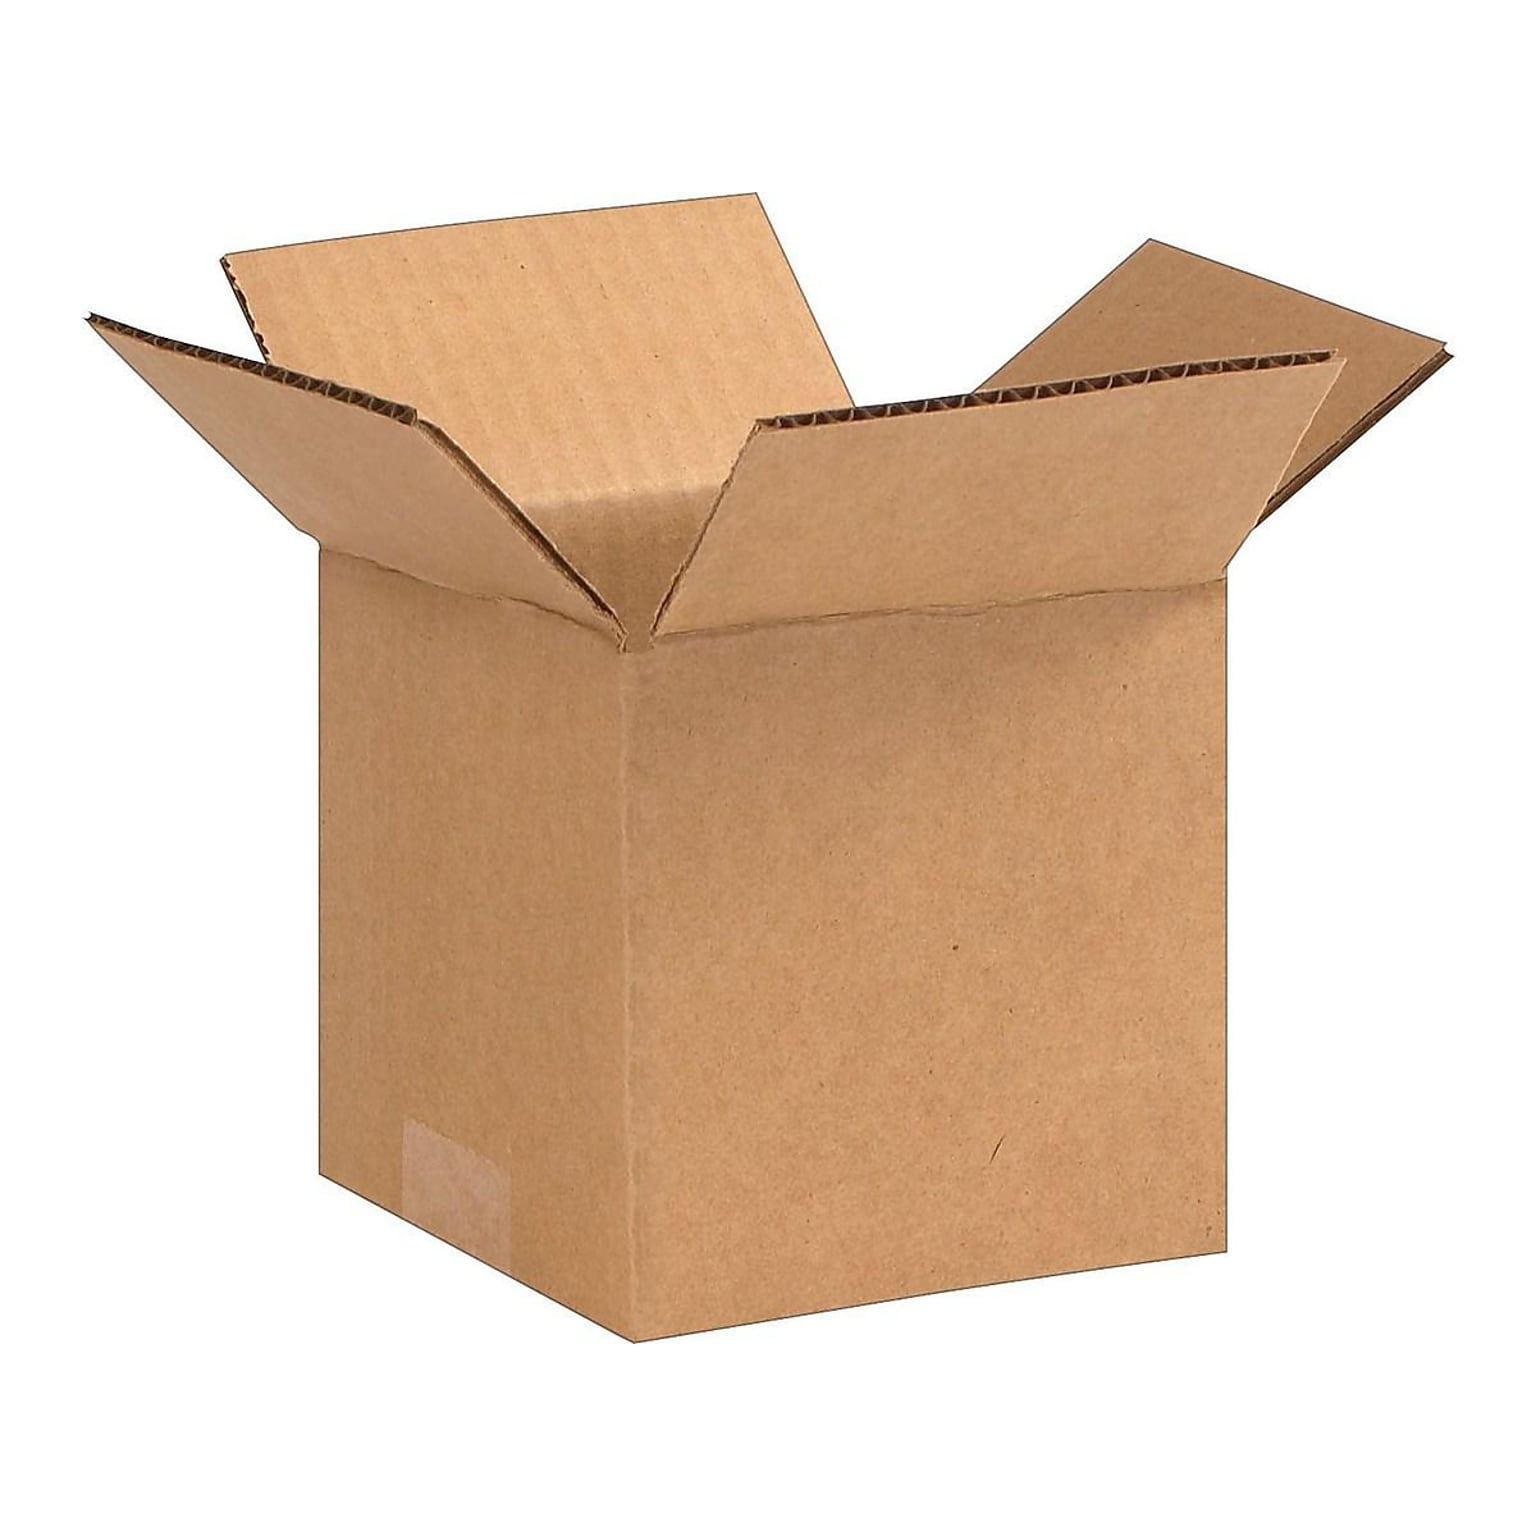 5 x 5 x 5 Shipping Boxes, ECT Rated, Kraft, 25/Pack (BS050505)